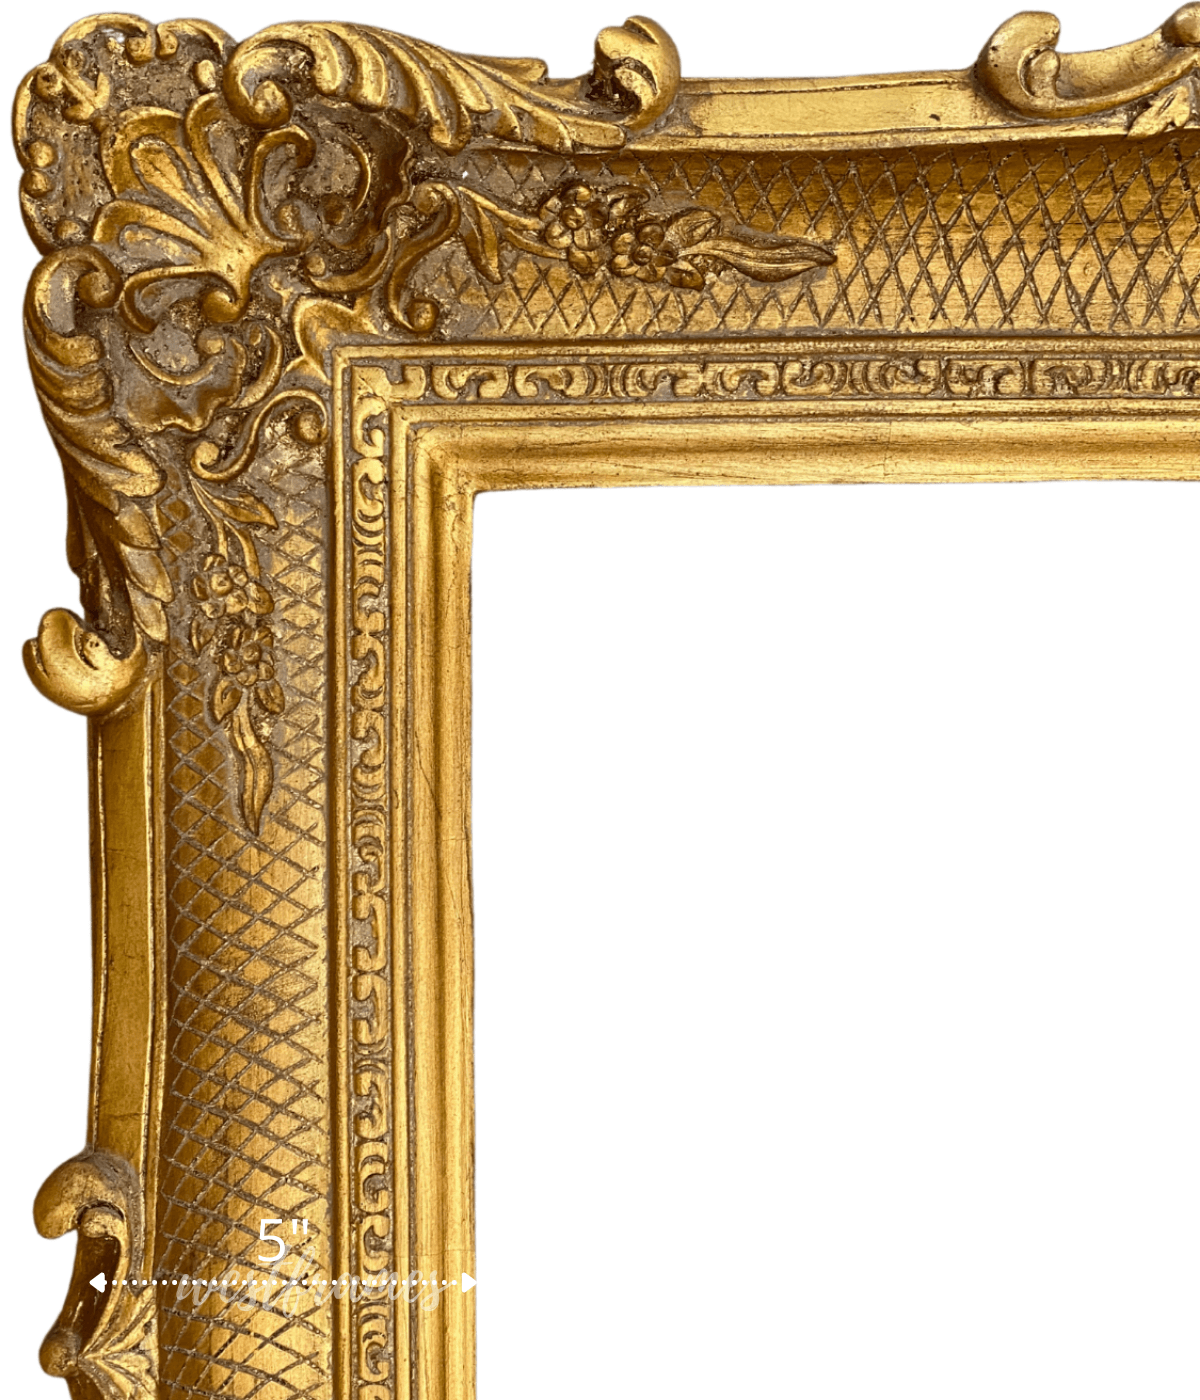 Napoleon French Baroque Rococo Ornate Wood Wall Picture Frame Gold 5" Wide - West Frames